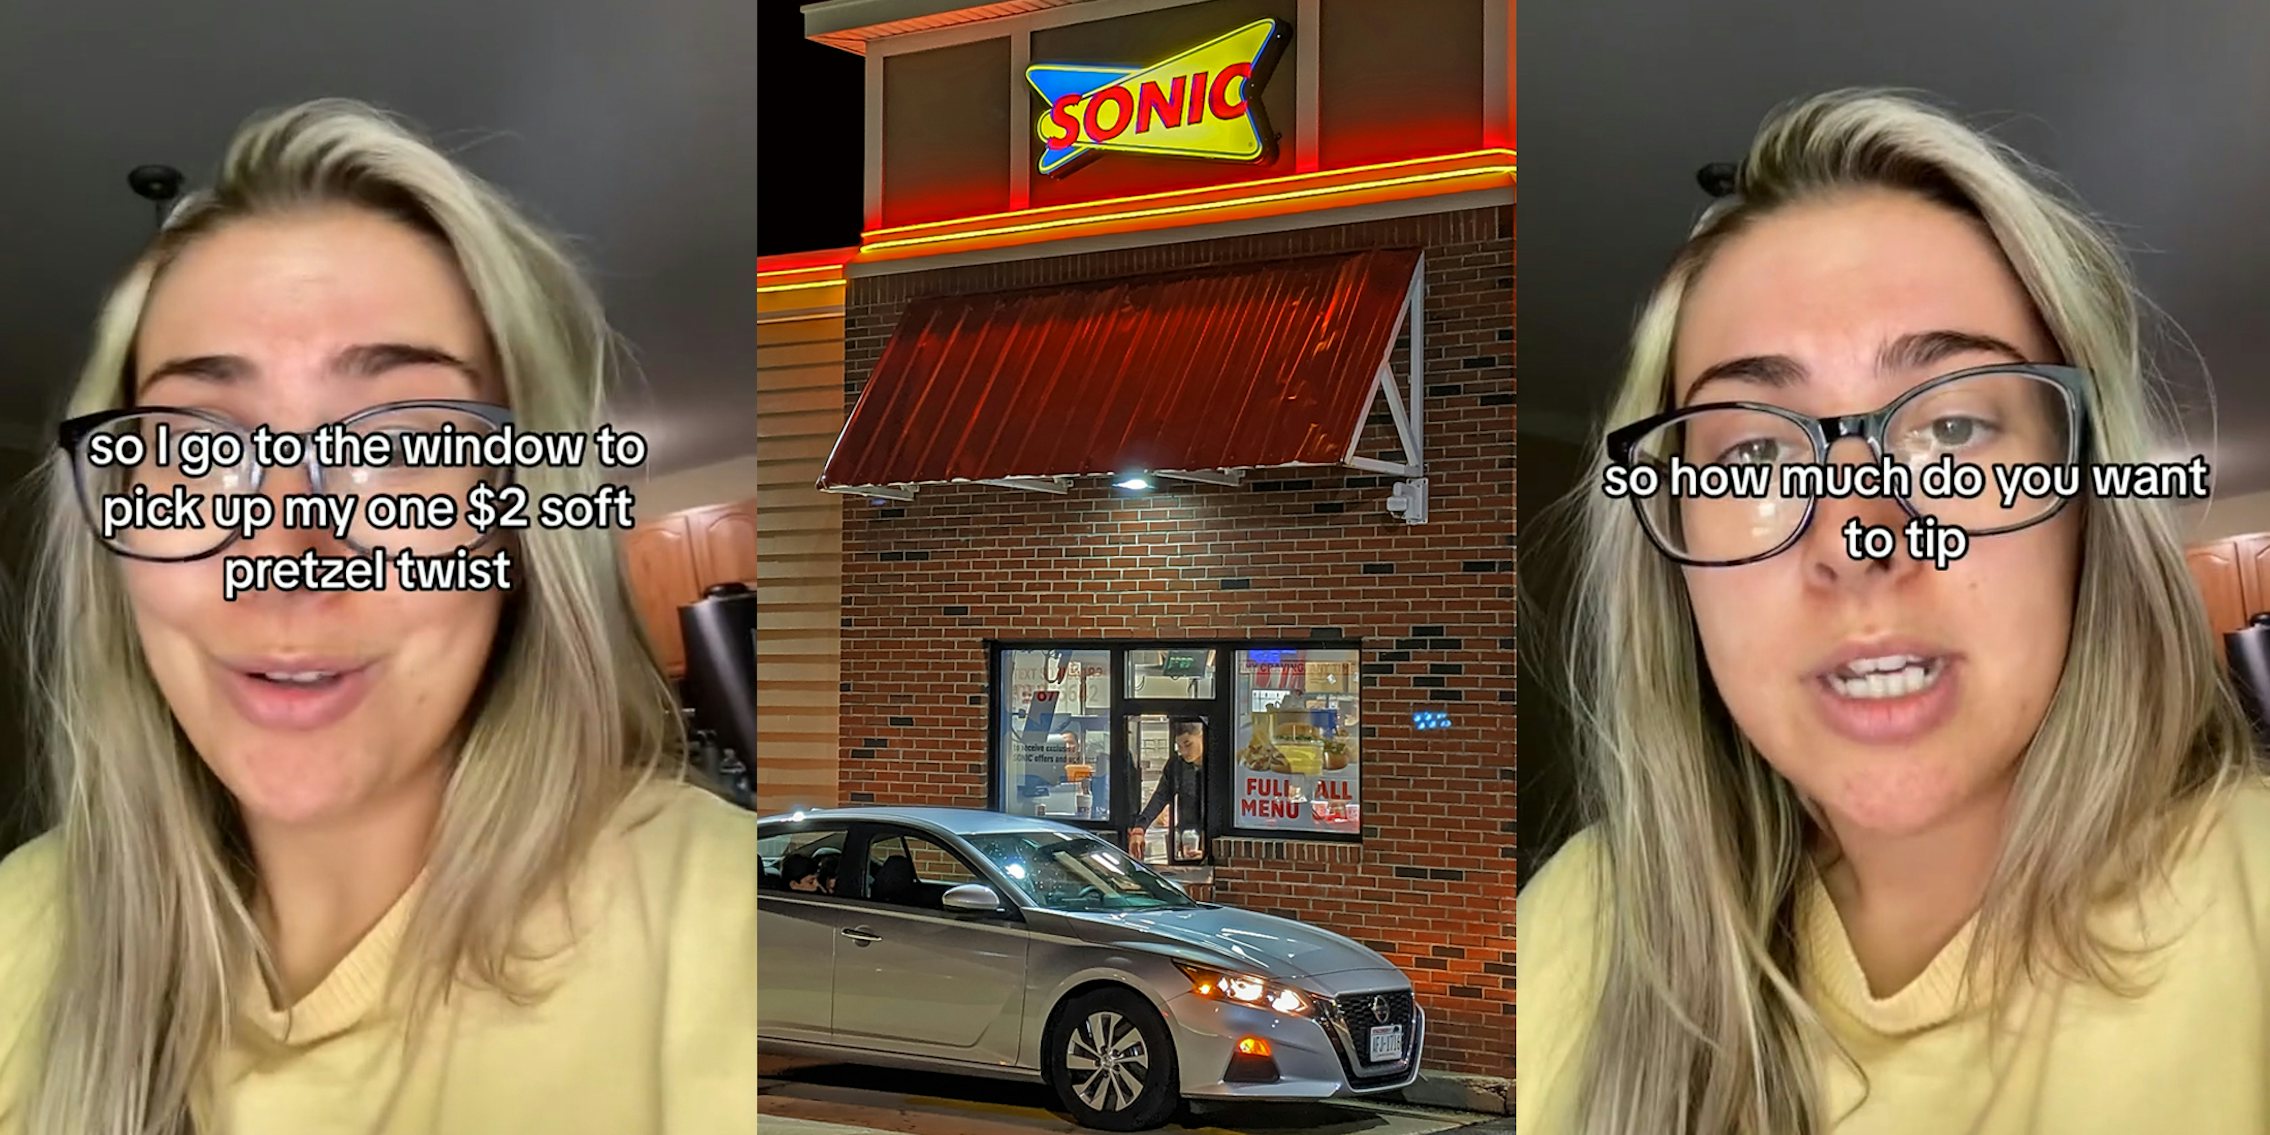 Sonic customer speaking with caption 'so I go to the window to pick up my one $2 soft pretzel twist' (l) Sonic drive thru at night with sign (c) Sonic customer speaking with caption 'so how much do you want to tip' (r)